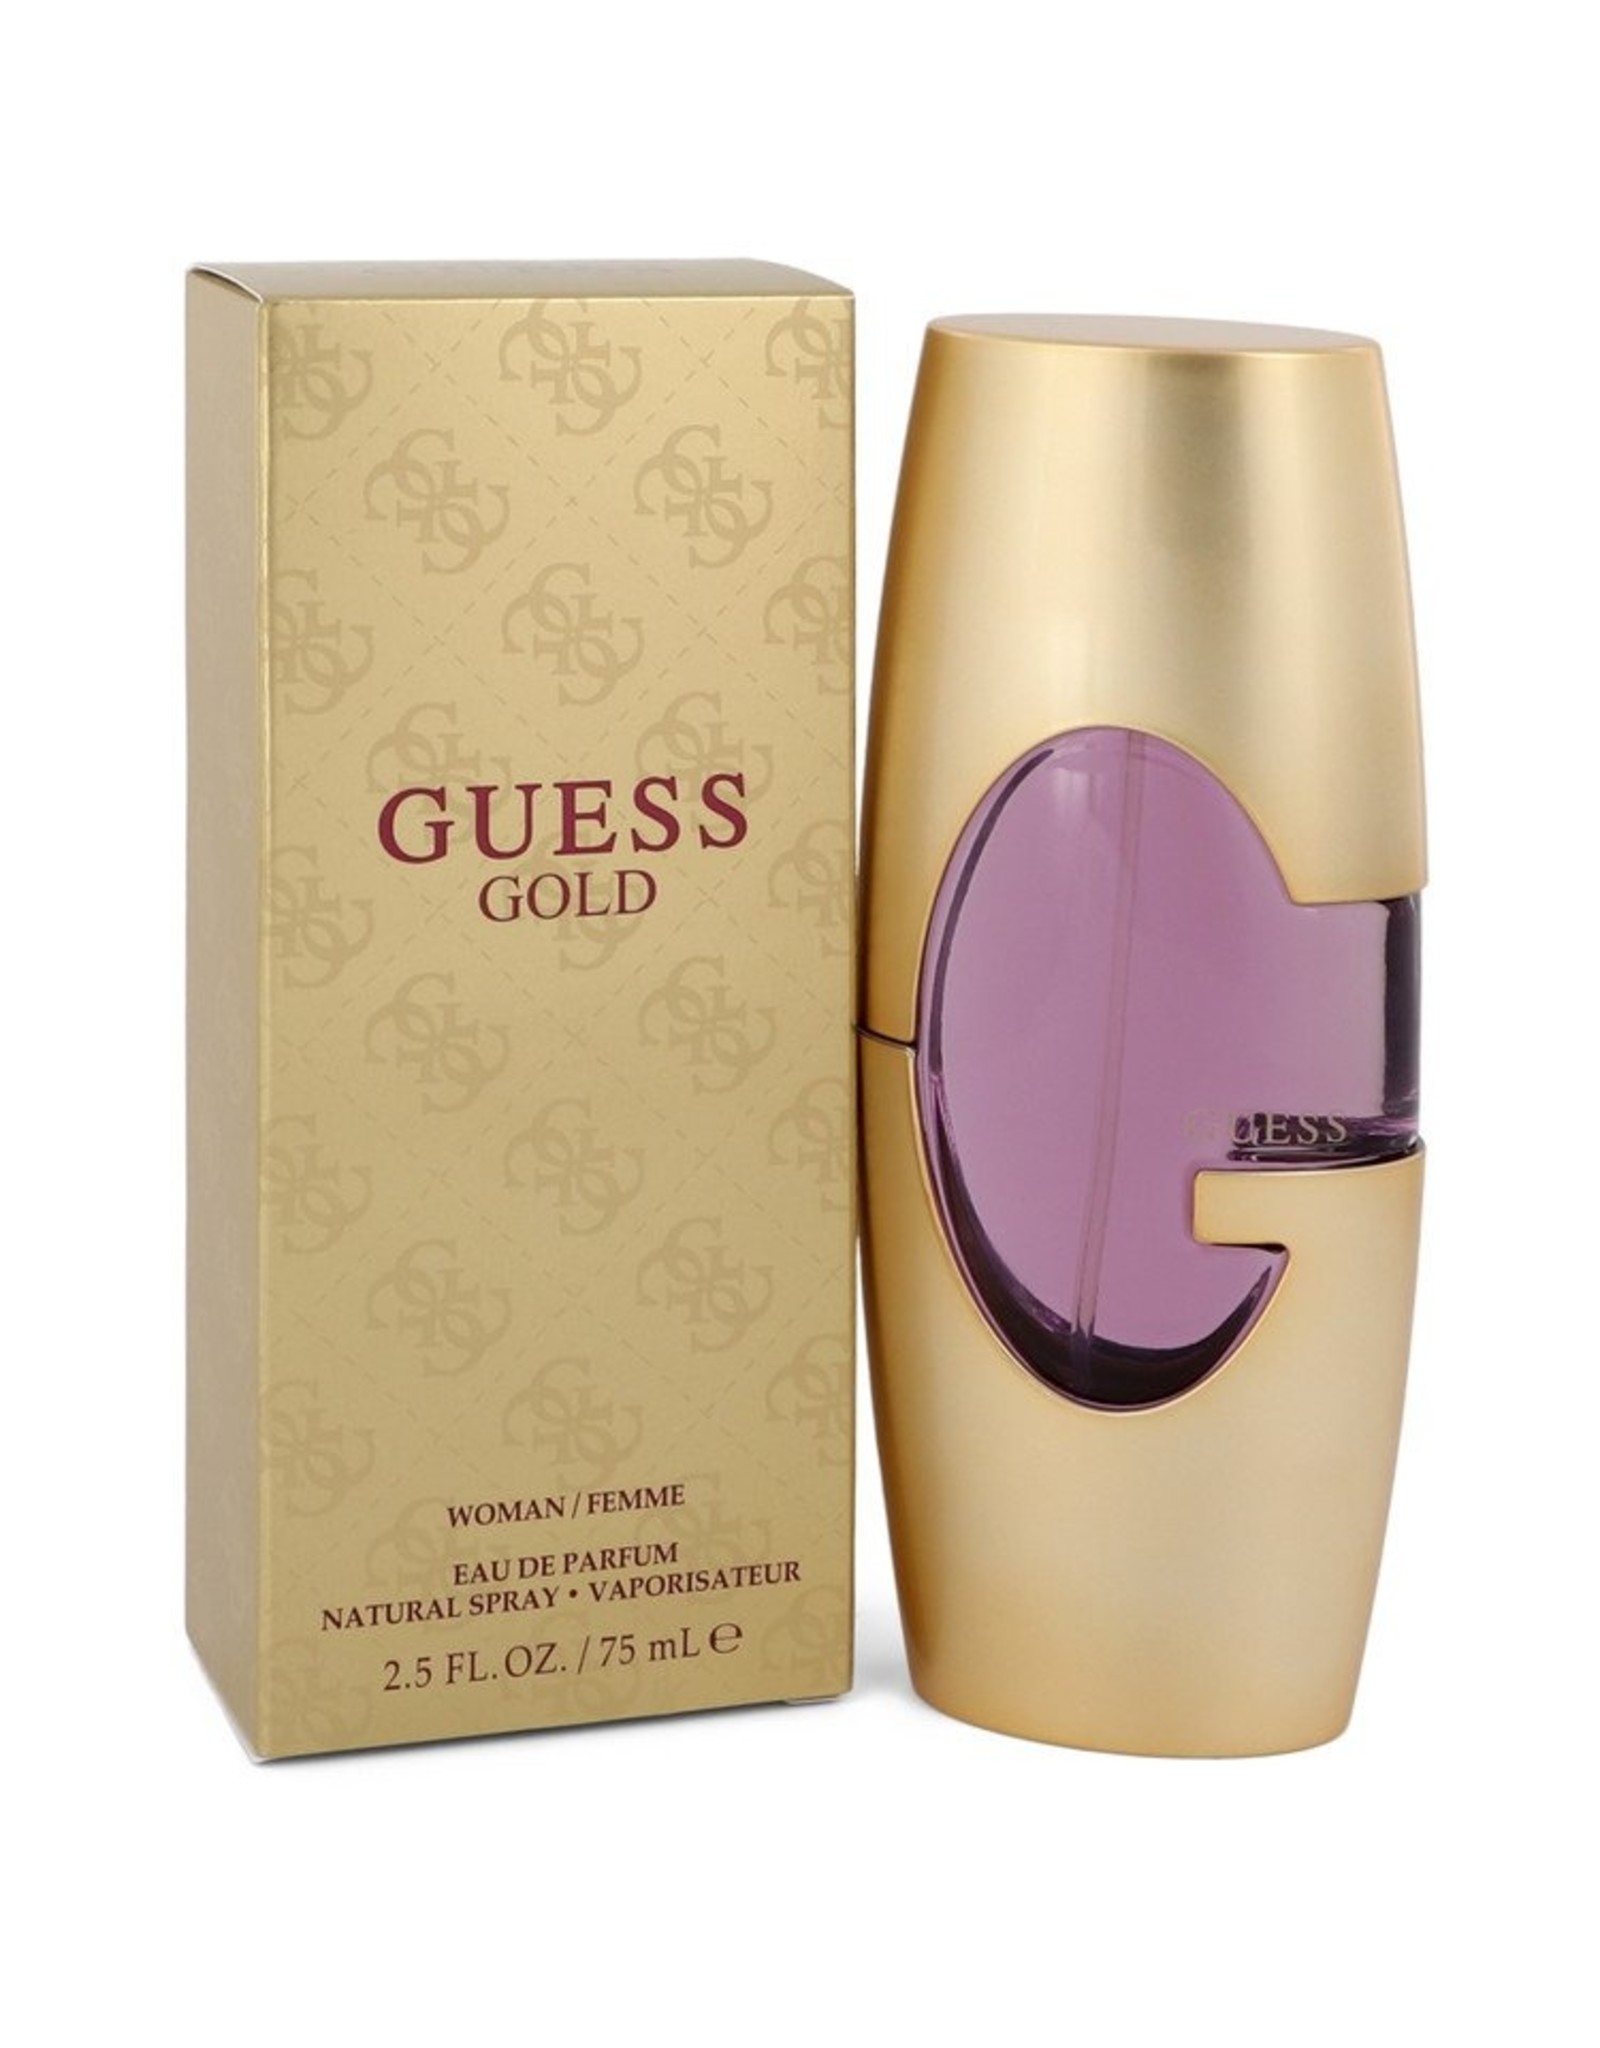 GUESS GUESS GOLD